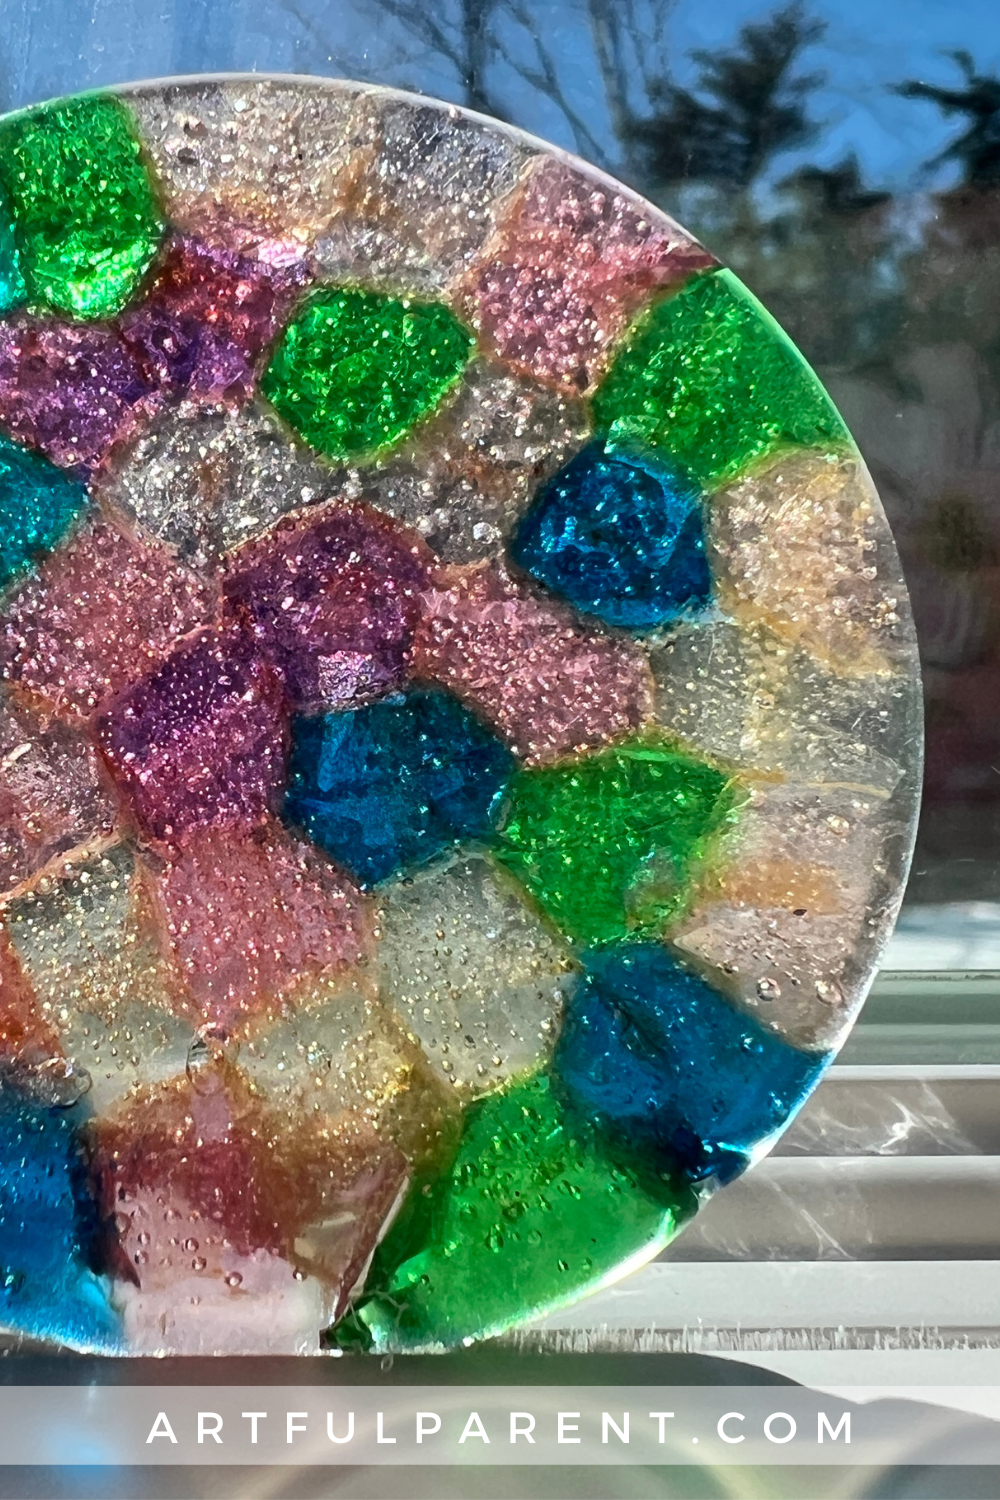 How to Make a Suncatcher with Beads